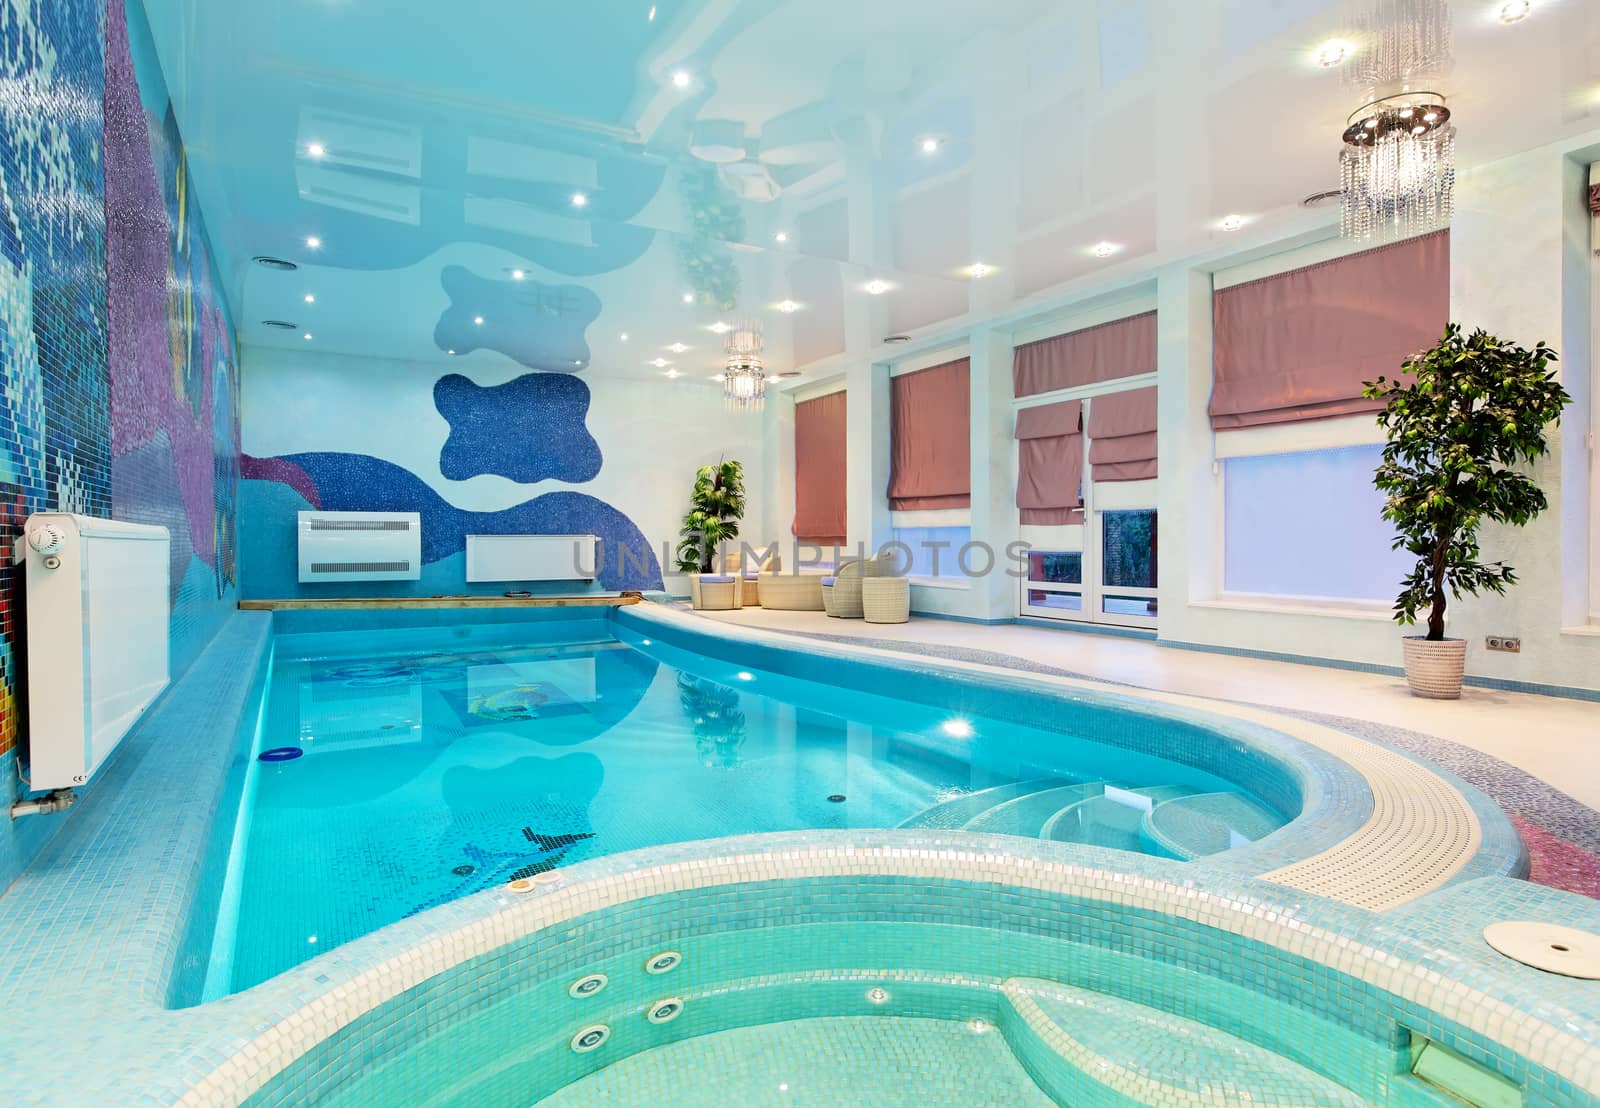 Swimming pool interior design with blue mosaic  by RawGroup